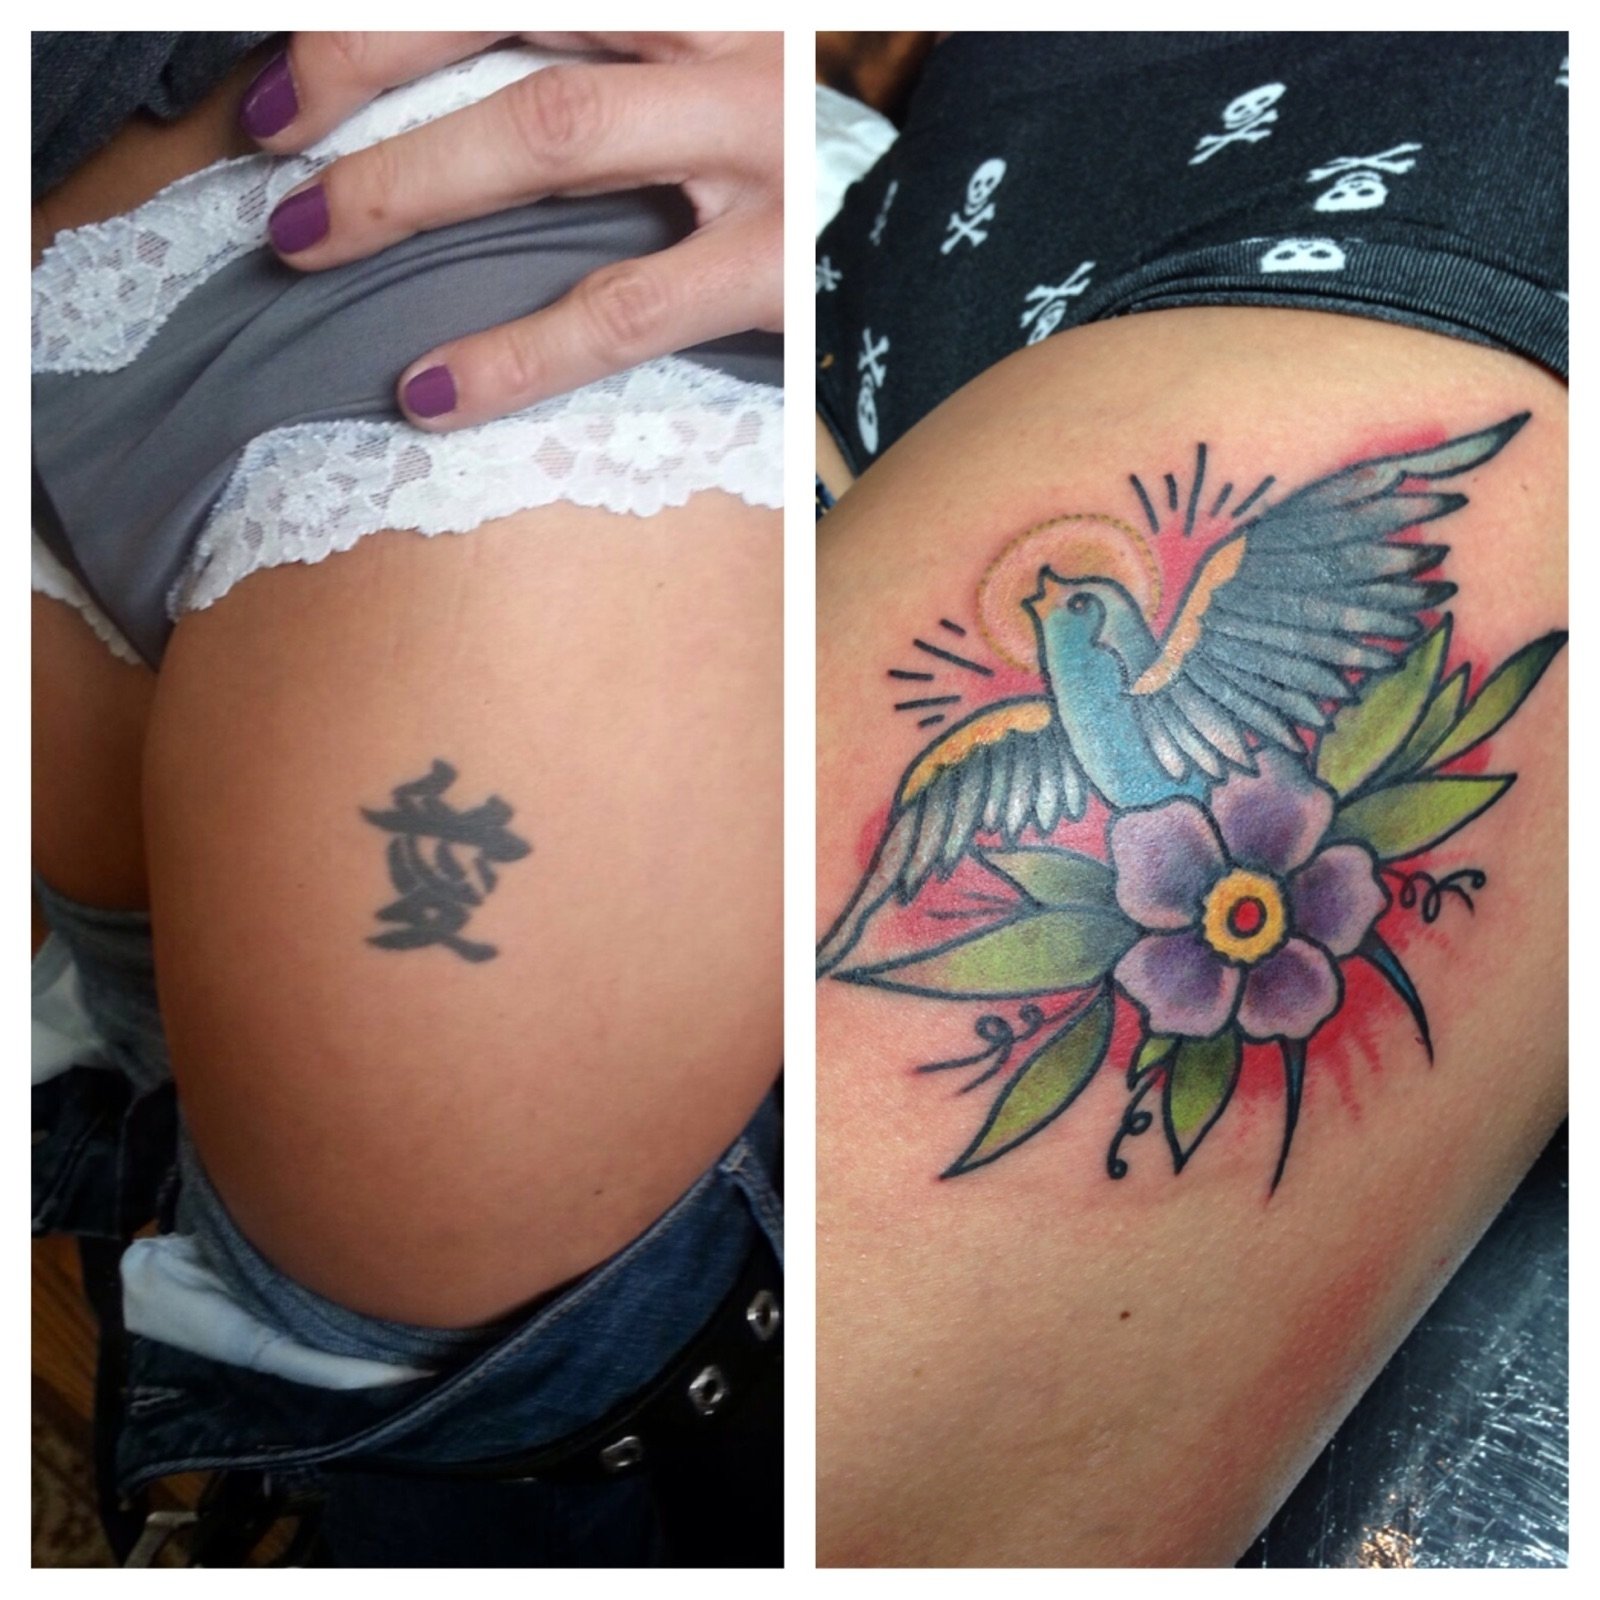 10 Most Recommended Tattoo Cover Up Ideas For Names cover up tattoos royal flesh tattoo and piercing chicago tattoo 6 2023